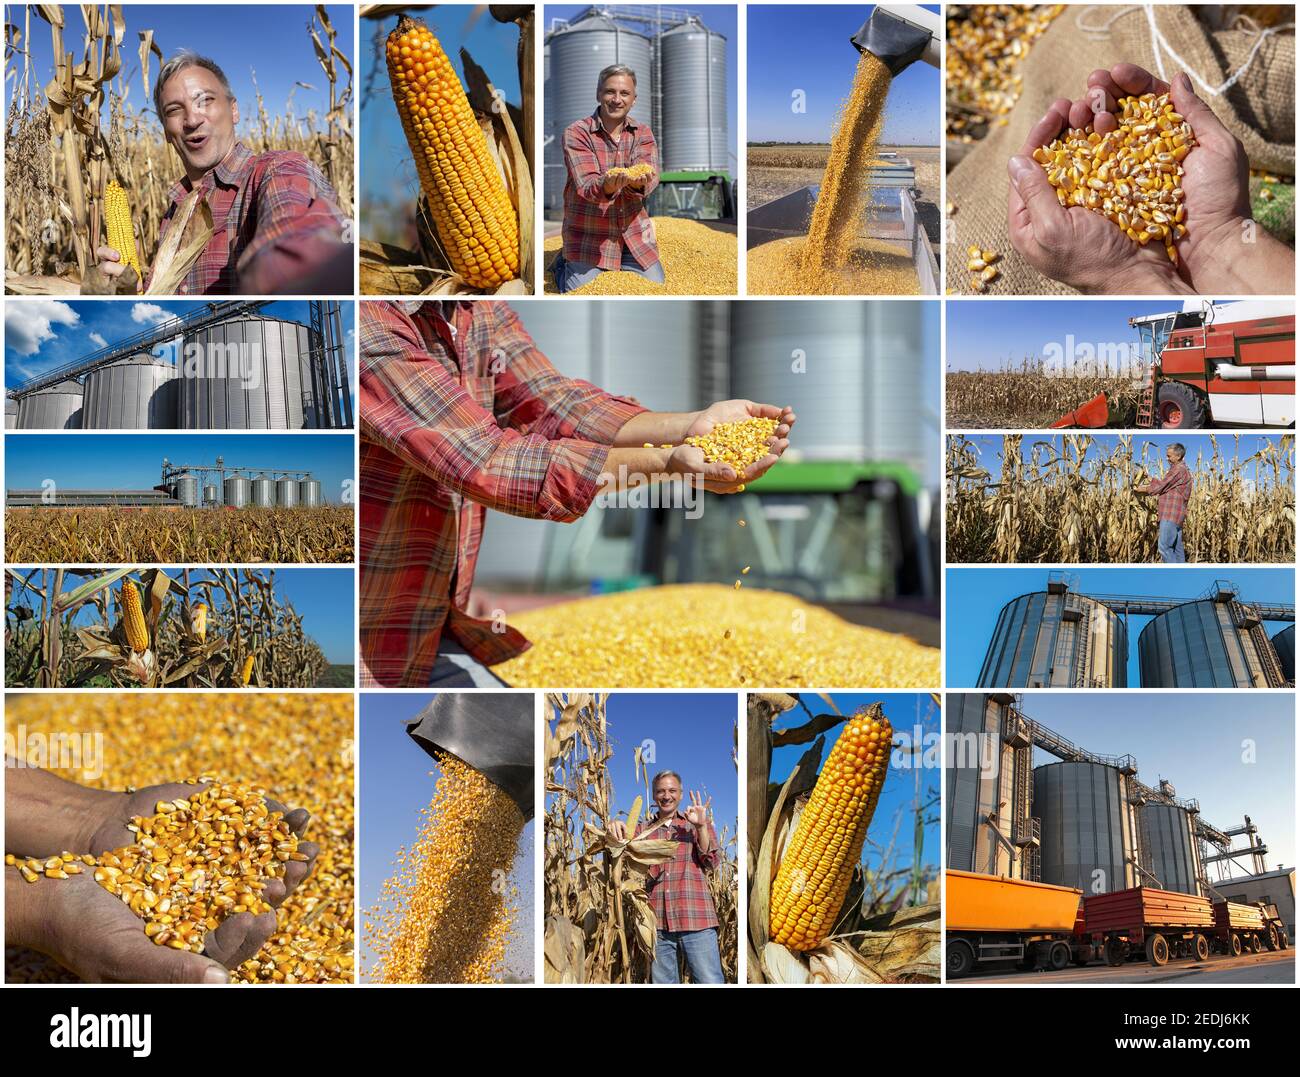 Collage of photographs showing ripe maize corn on the cob in cultivated agricultural field, harvest time and maize storage in agricultural grain dryer Stock Photo